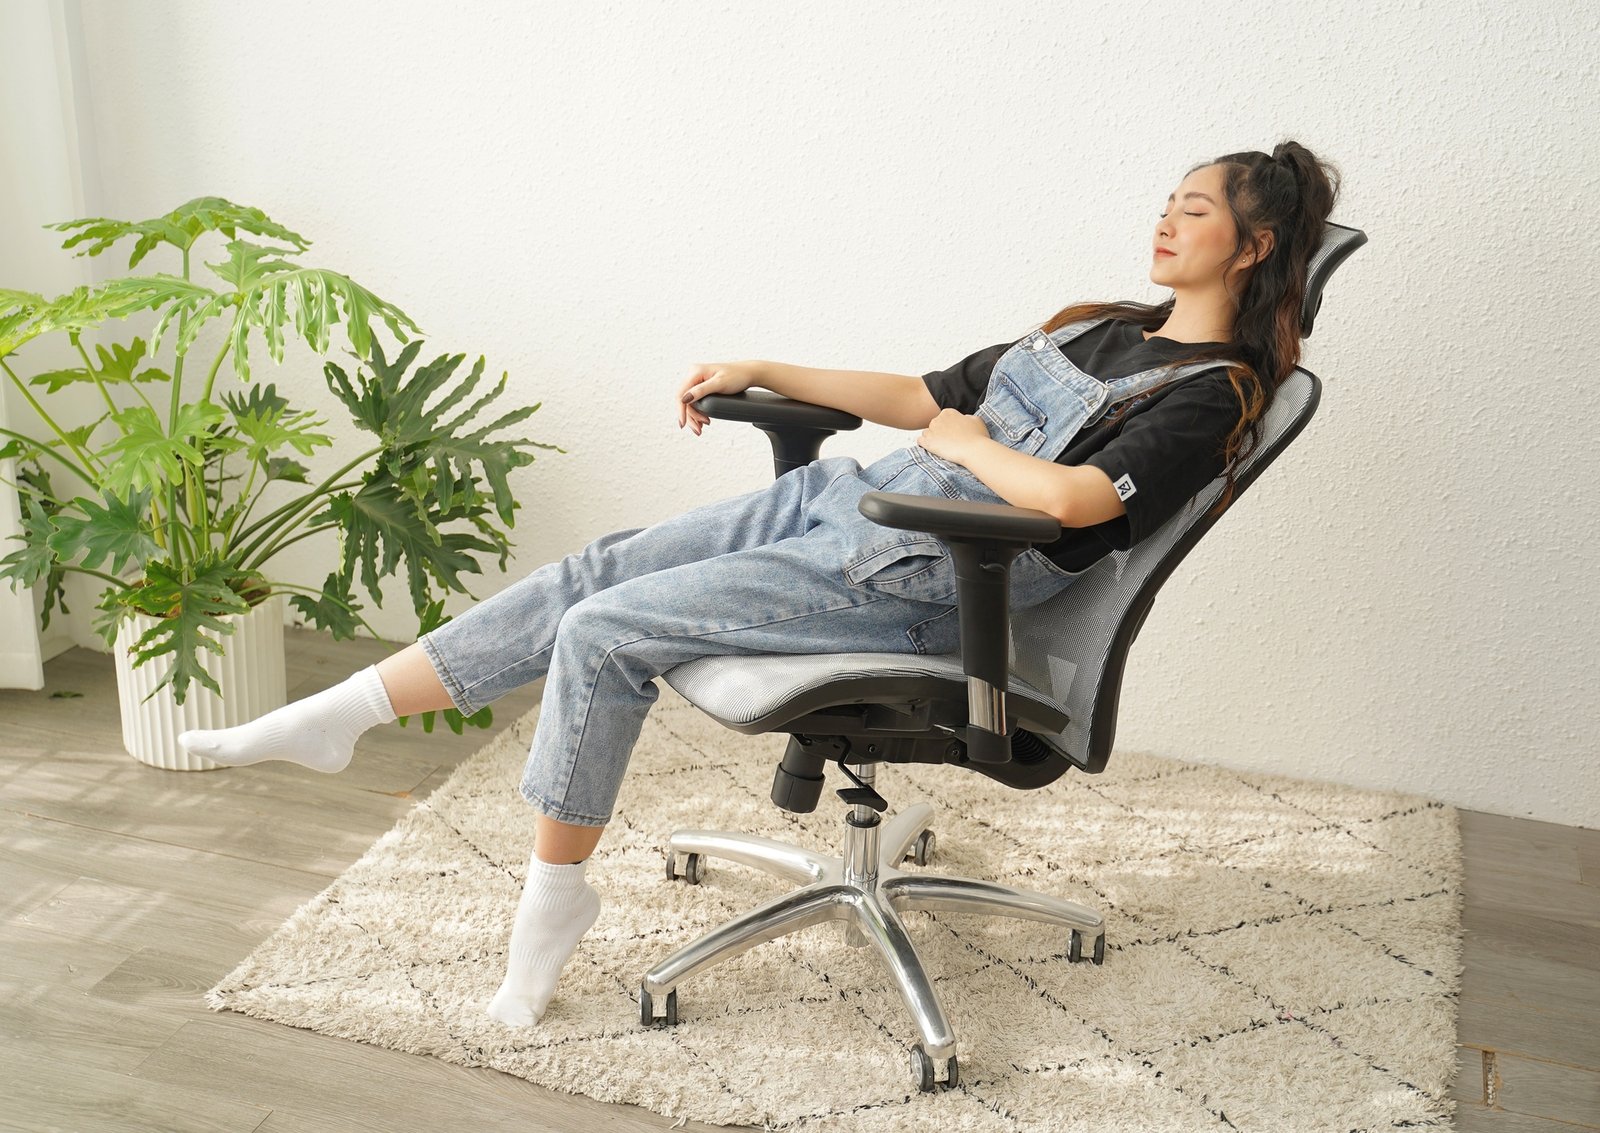 E-DRA EEC215 ergonomic chair: High quality materials, durable, comfortable, but only mid-range price 2